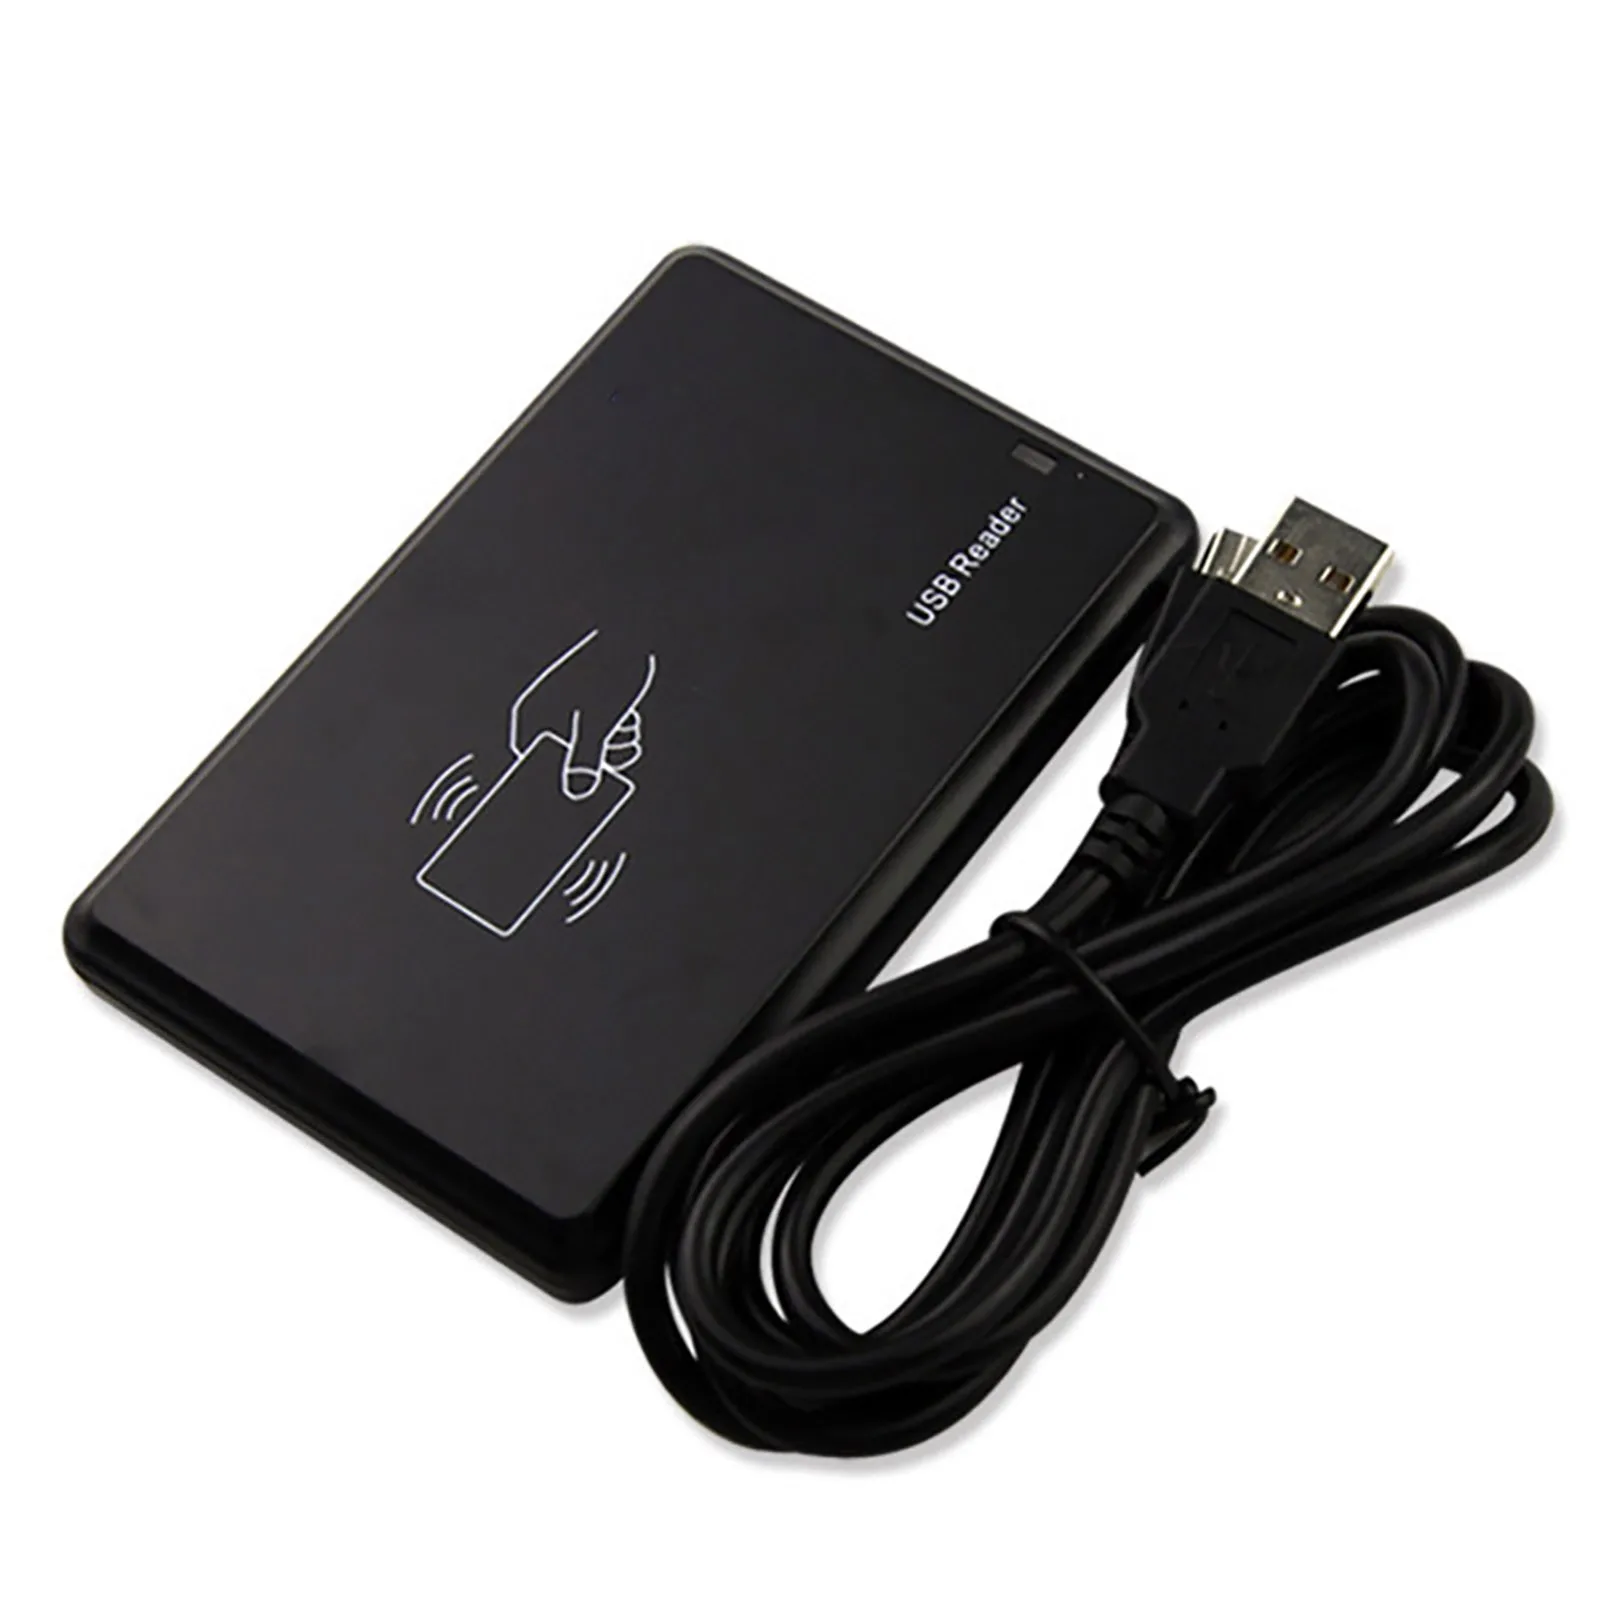 

USB Interface Card Reader Convenient Fast Read Card Number for PC Laptop Accessories